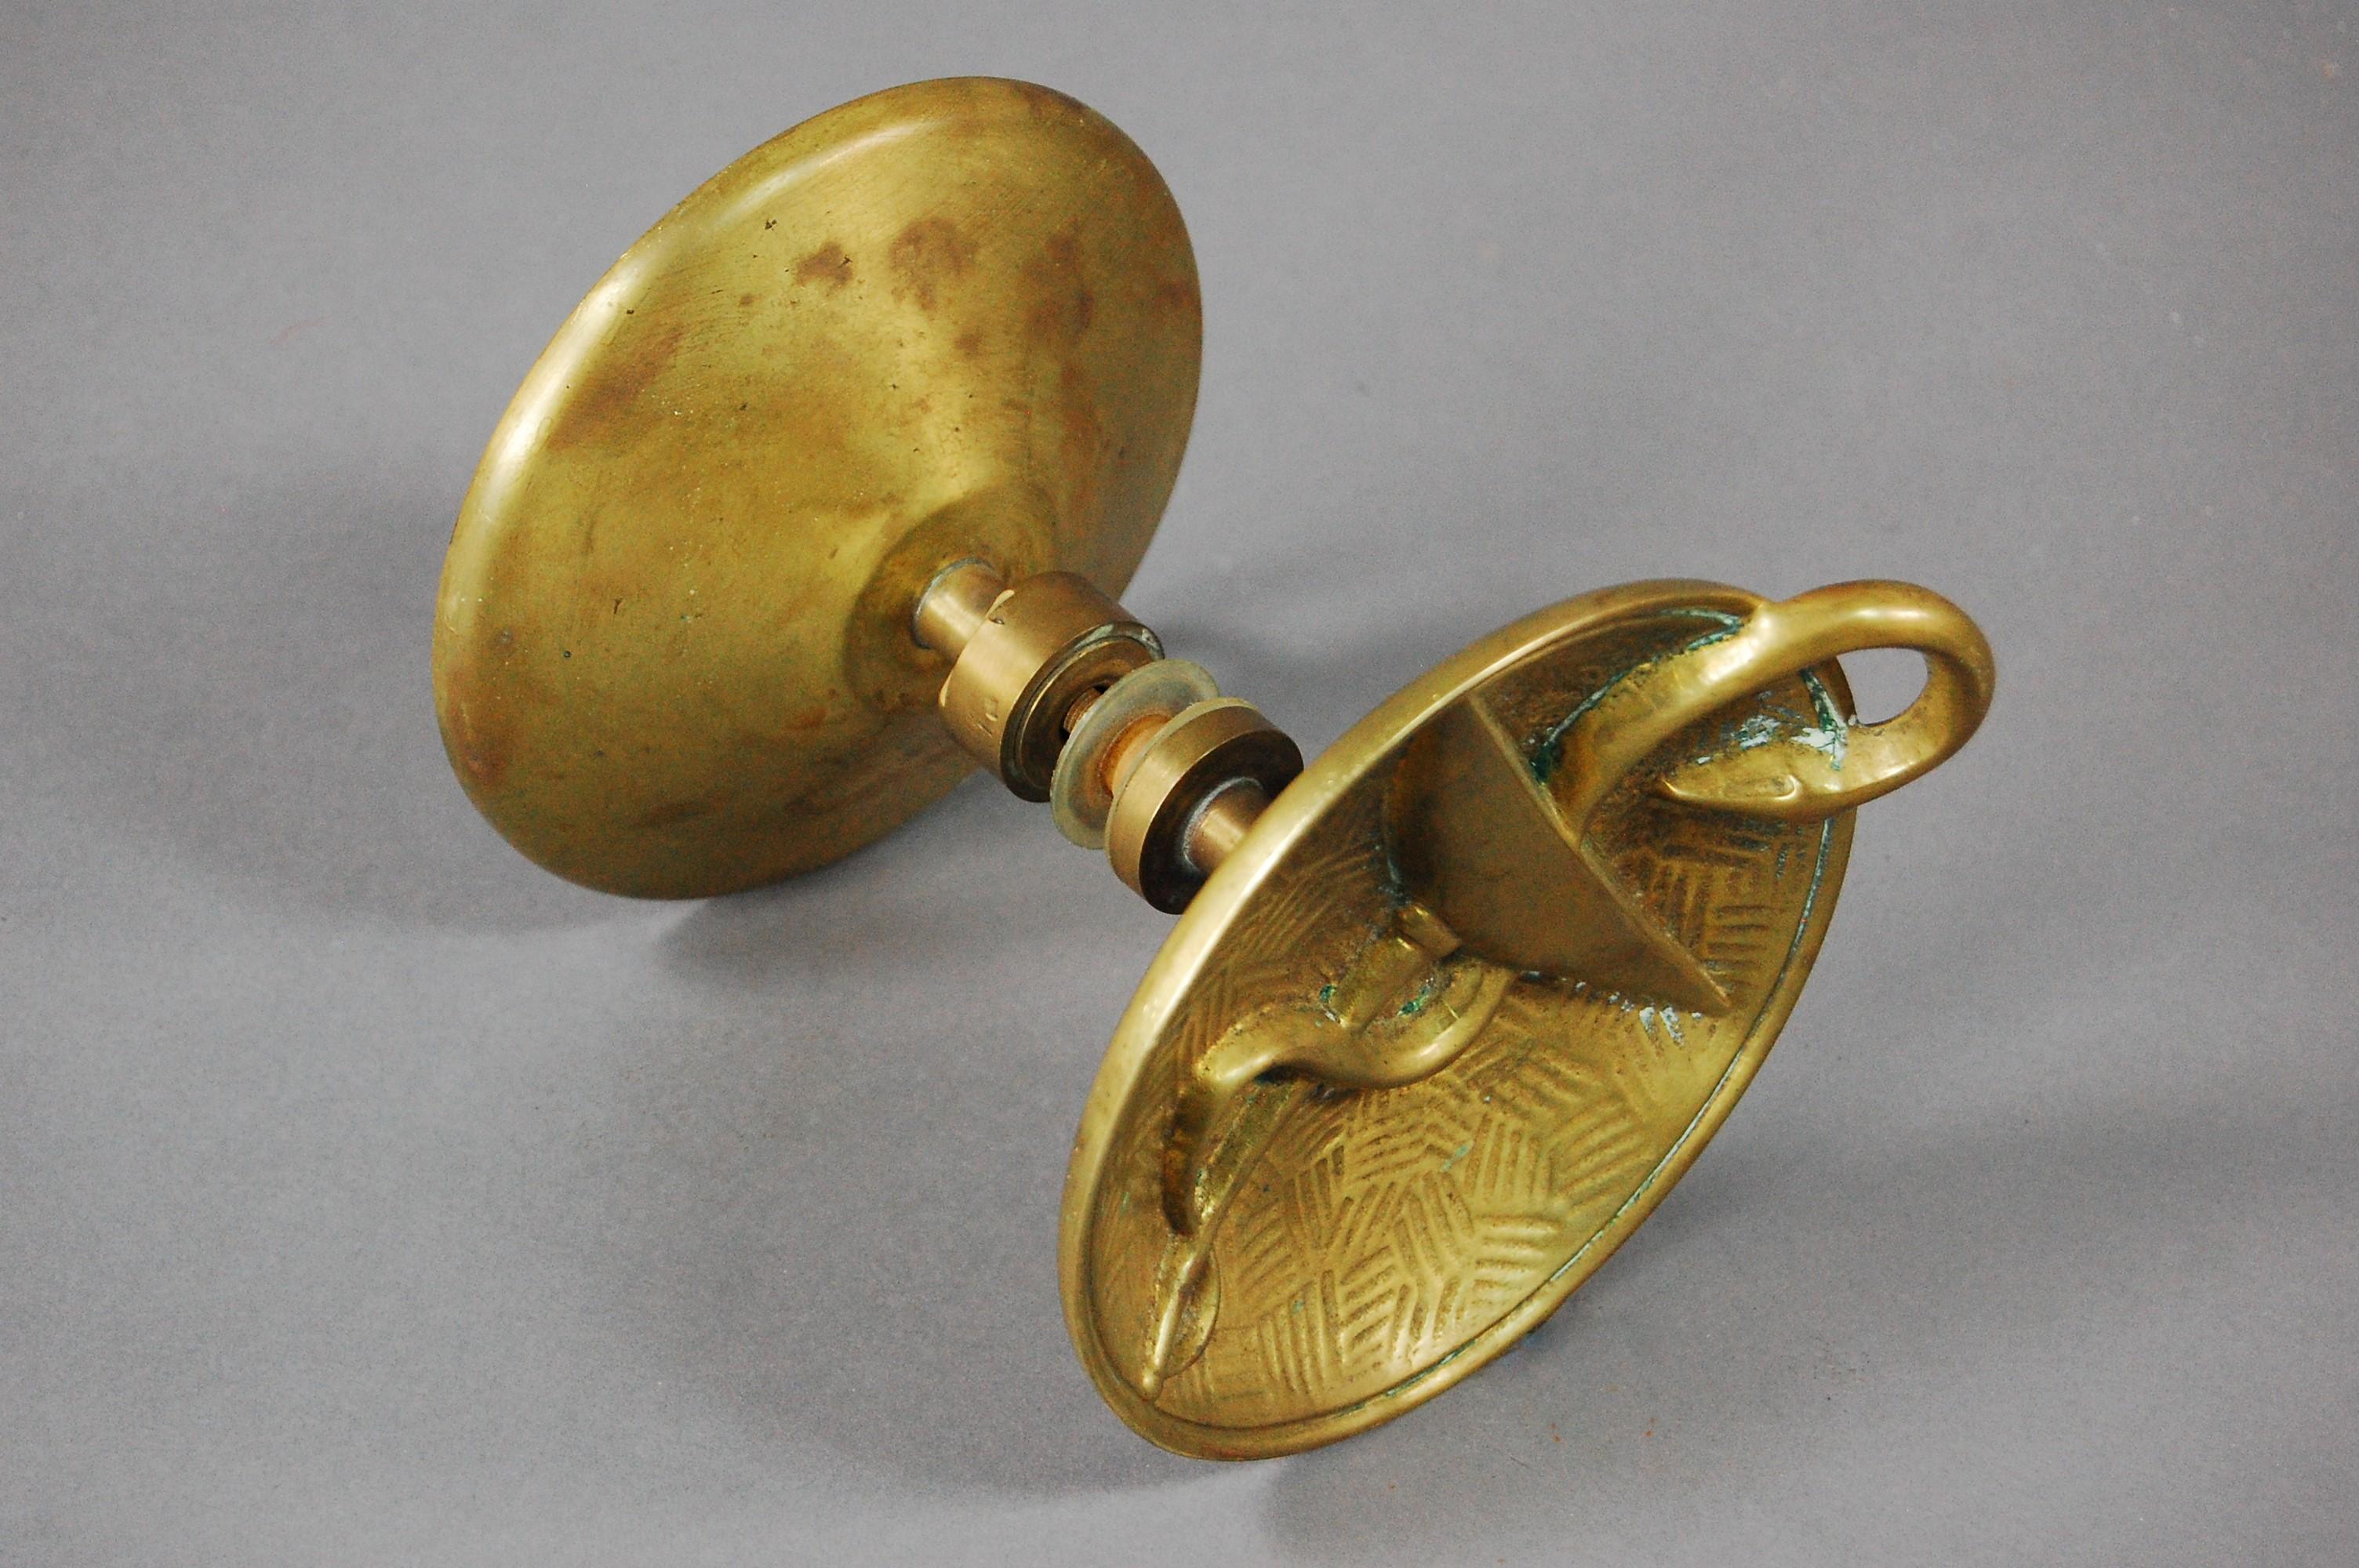 Large Brass Pharmacy Door Handles In Fair Condition In Pease pottage, West Sussex